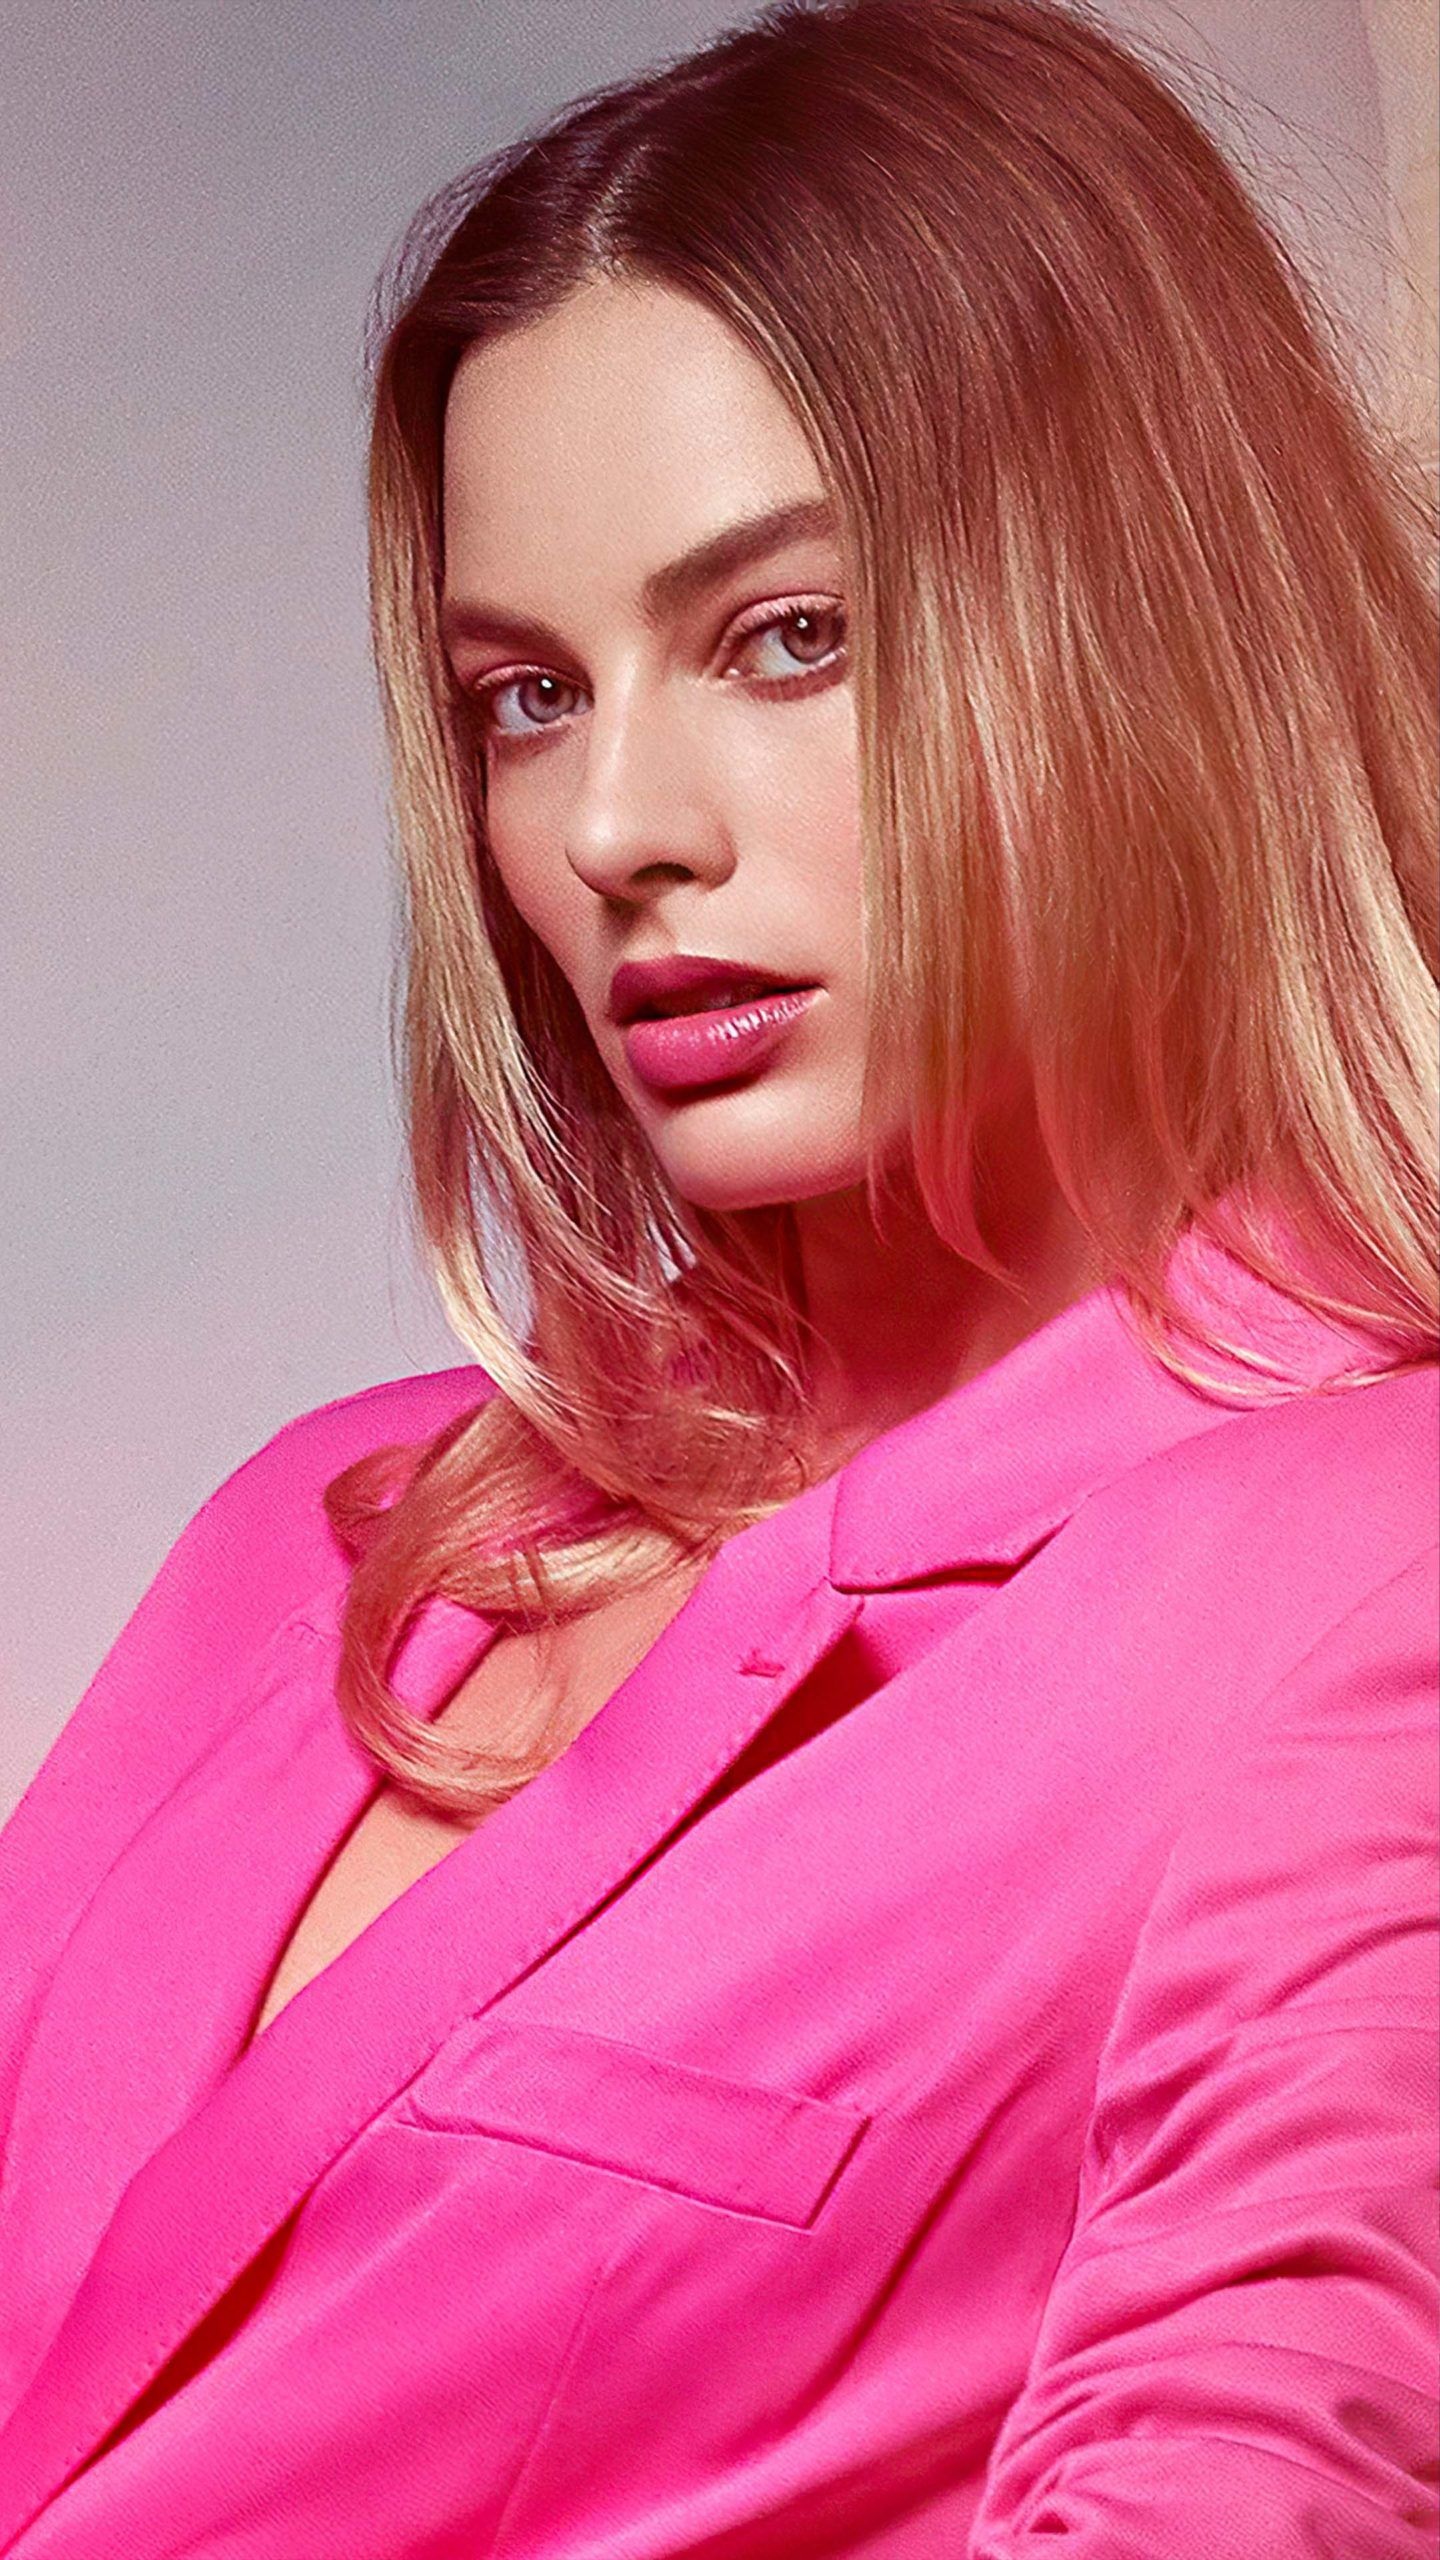 Margot Robbie: Known for her role as Donna Freedman on the soap opera Neighbours, which earned her two Logie Award nominations. 1440x2560 HD Background.